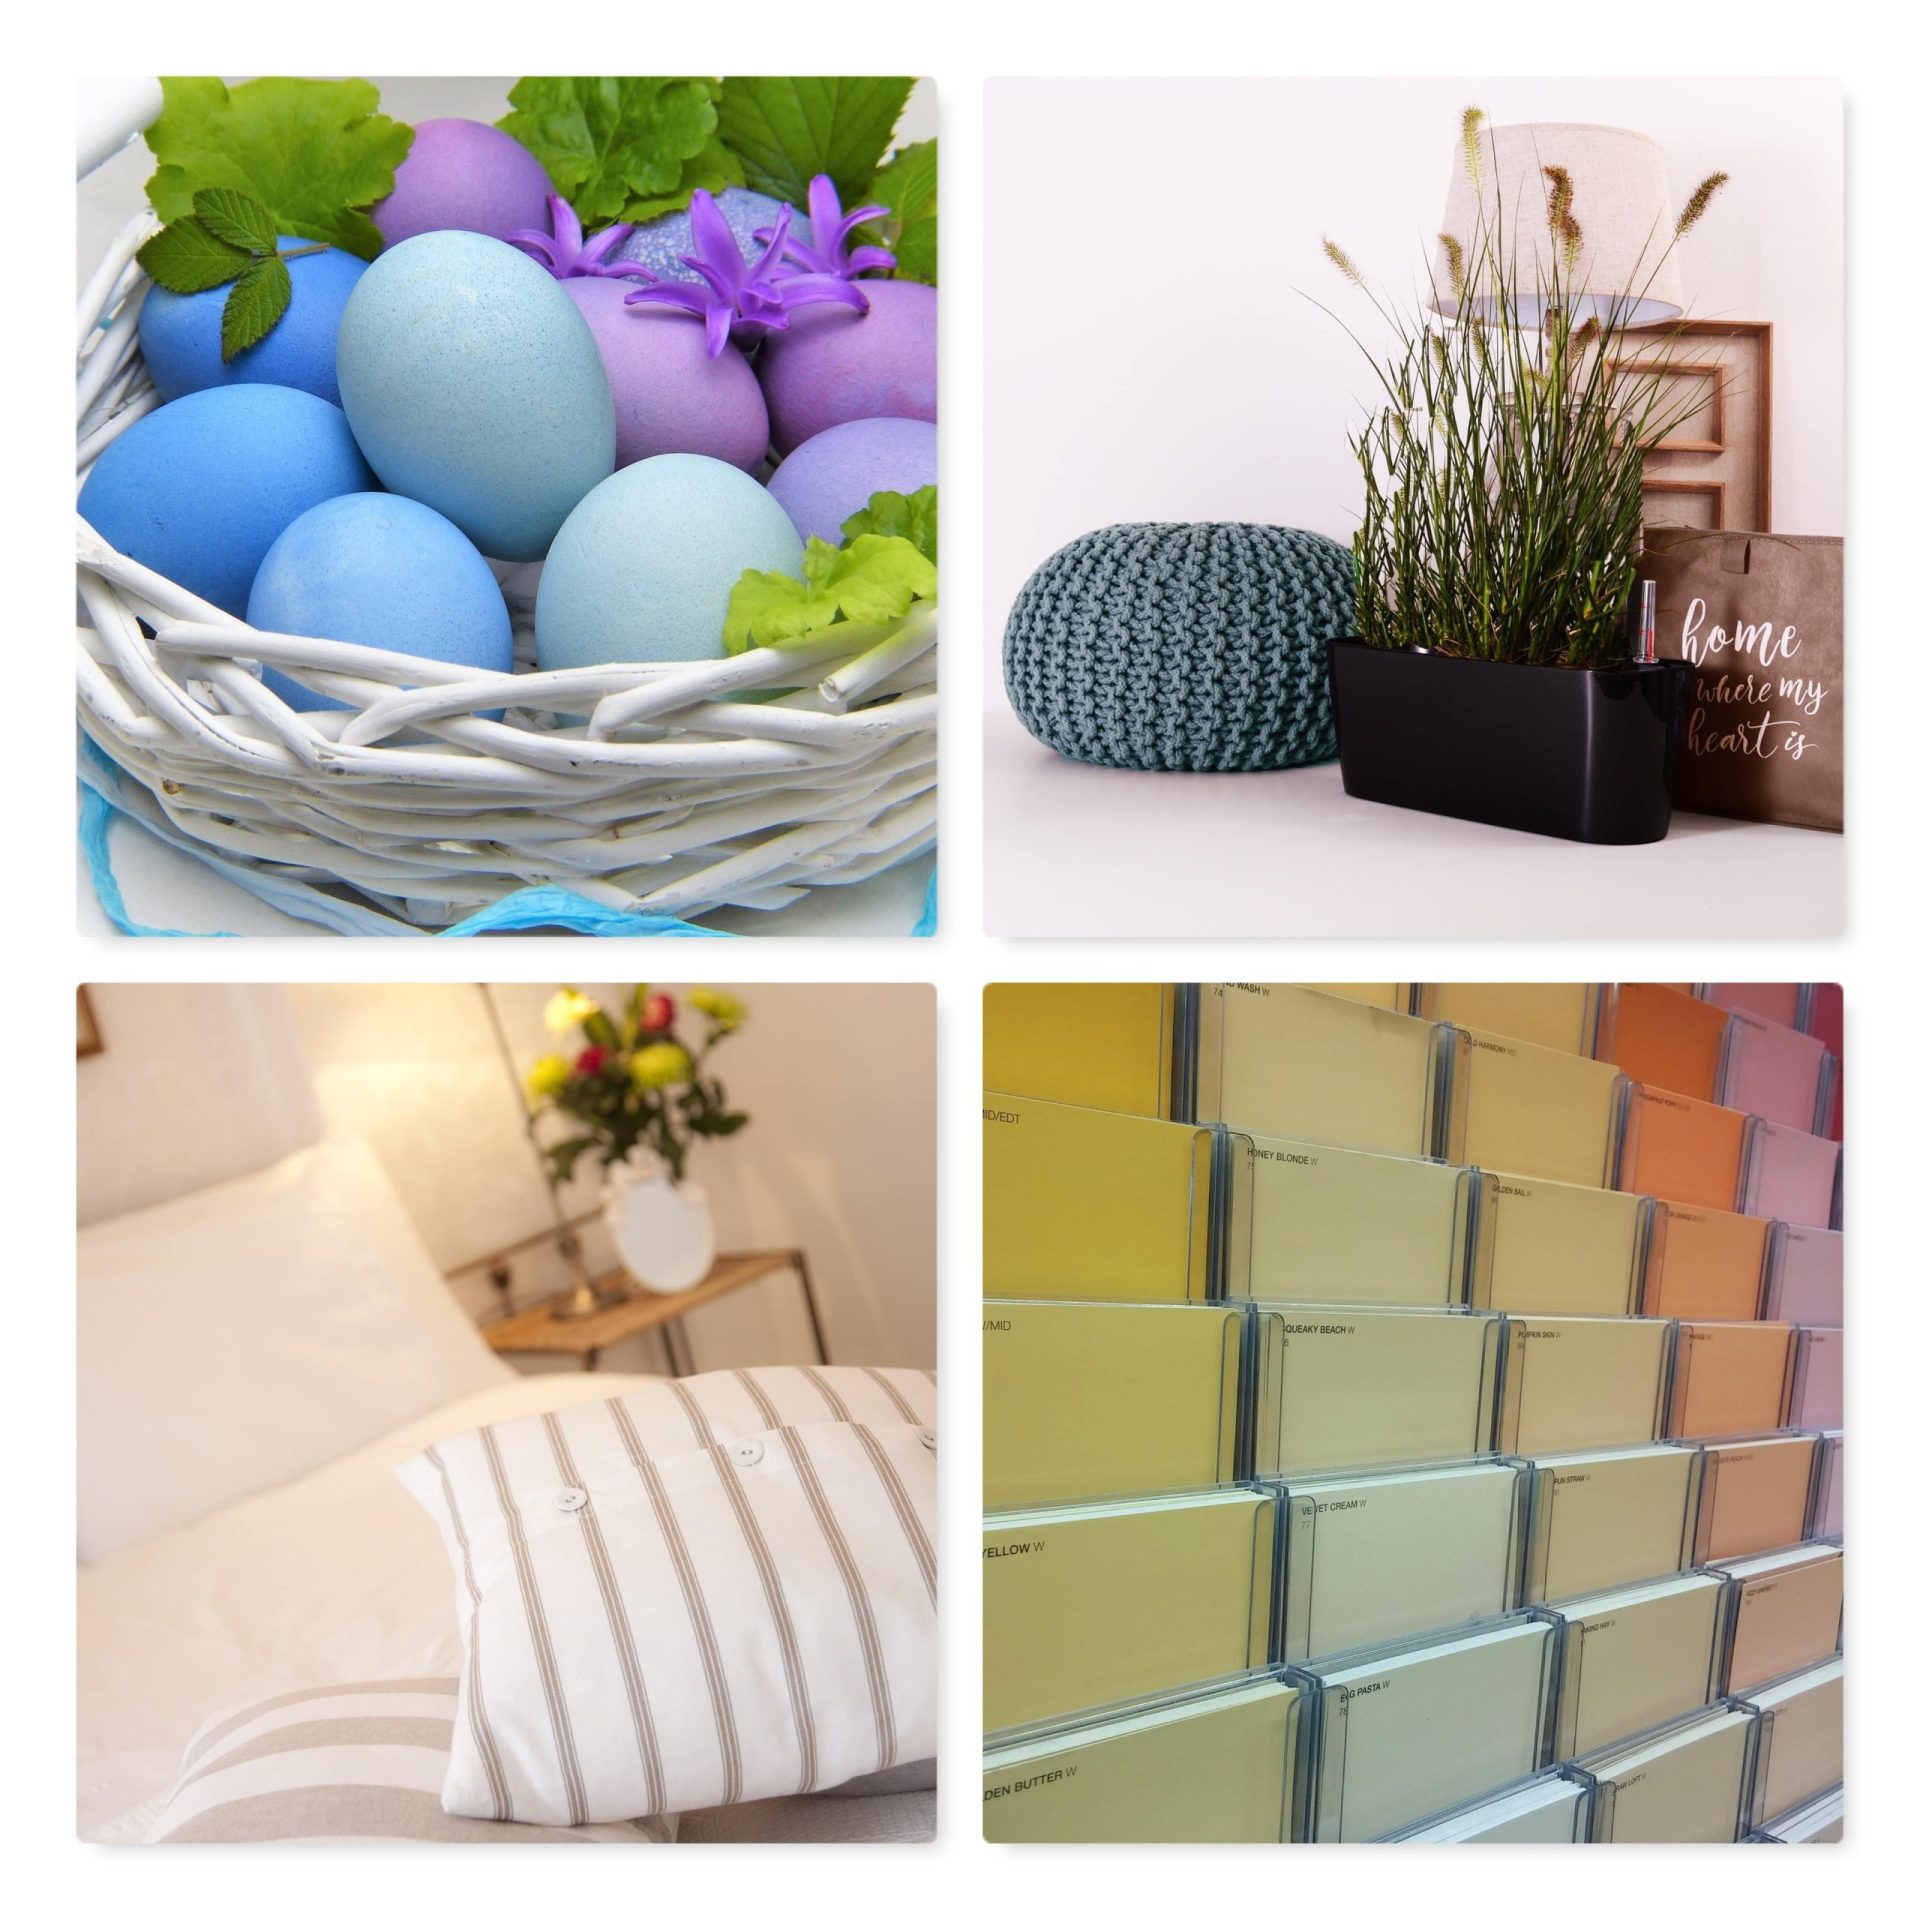 4 spring decorating idea images to use for inspiration